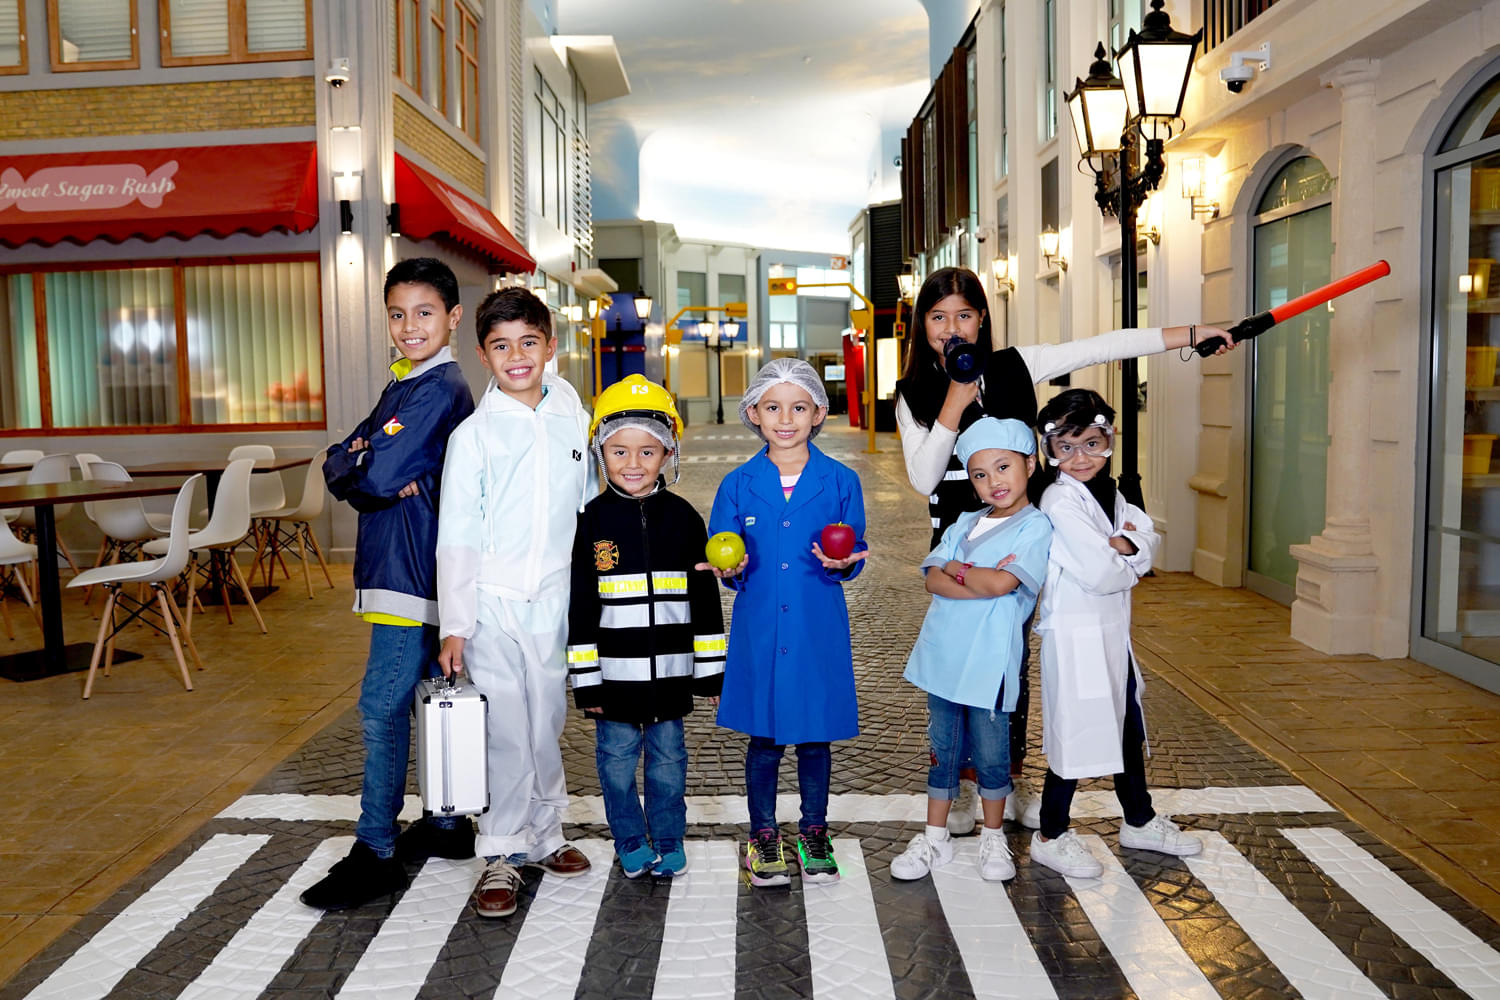 Over 40 proffessions to choose in Kidzania